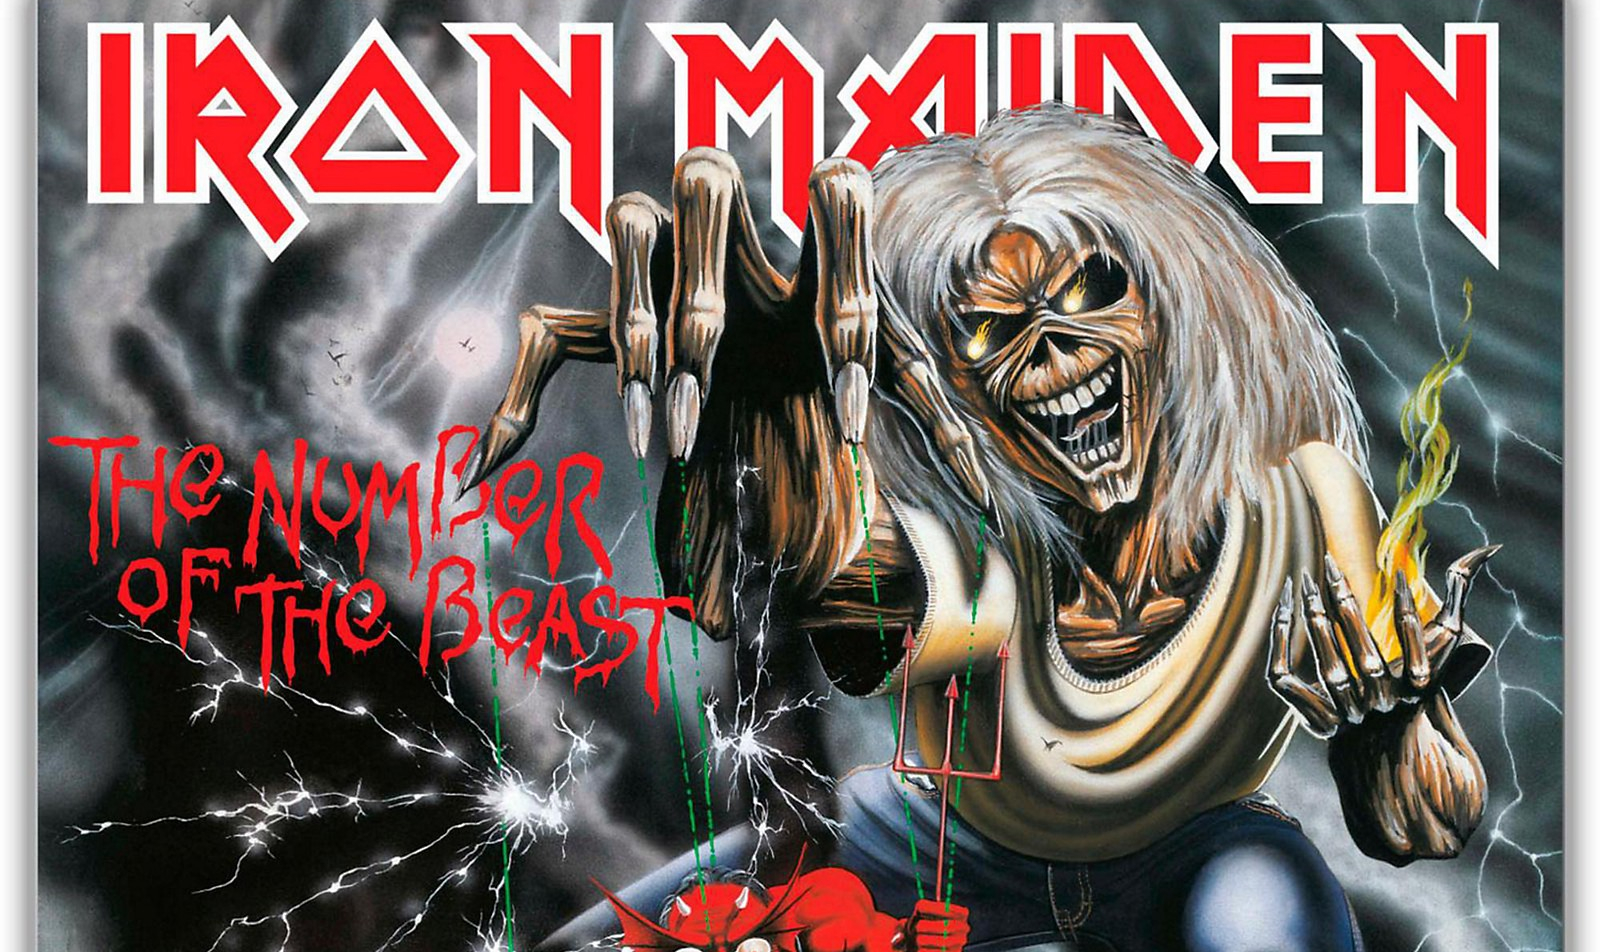 40 Years Ago: Iron Maiden Releases “The Number Of The Beast” | KLOS-FM